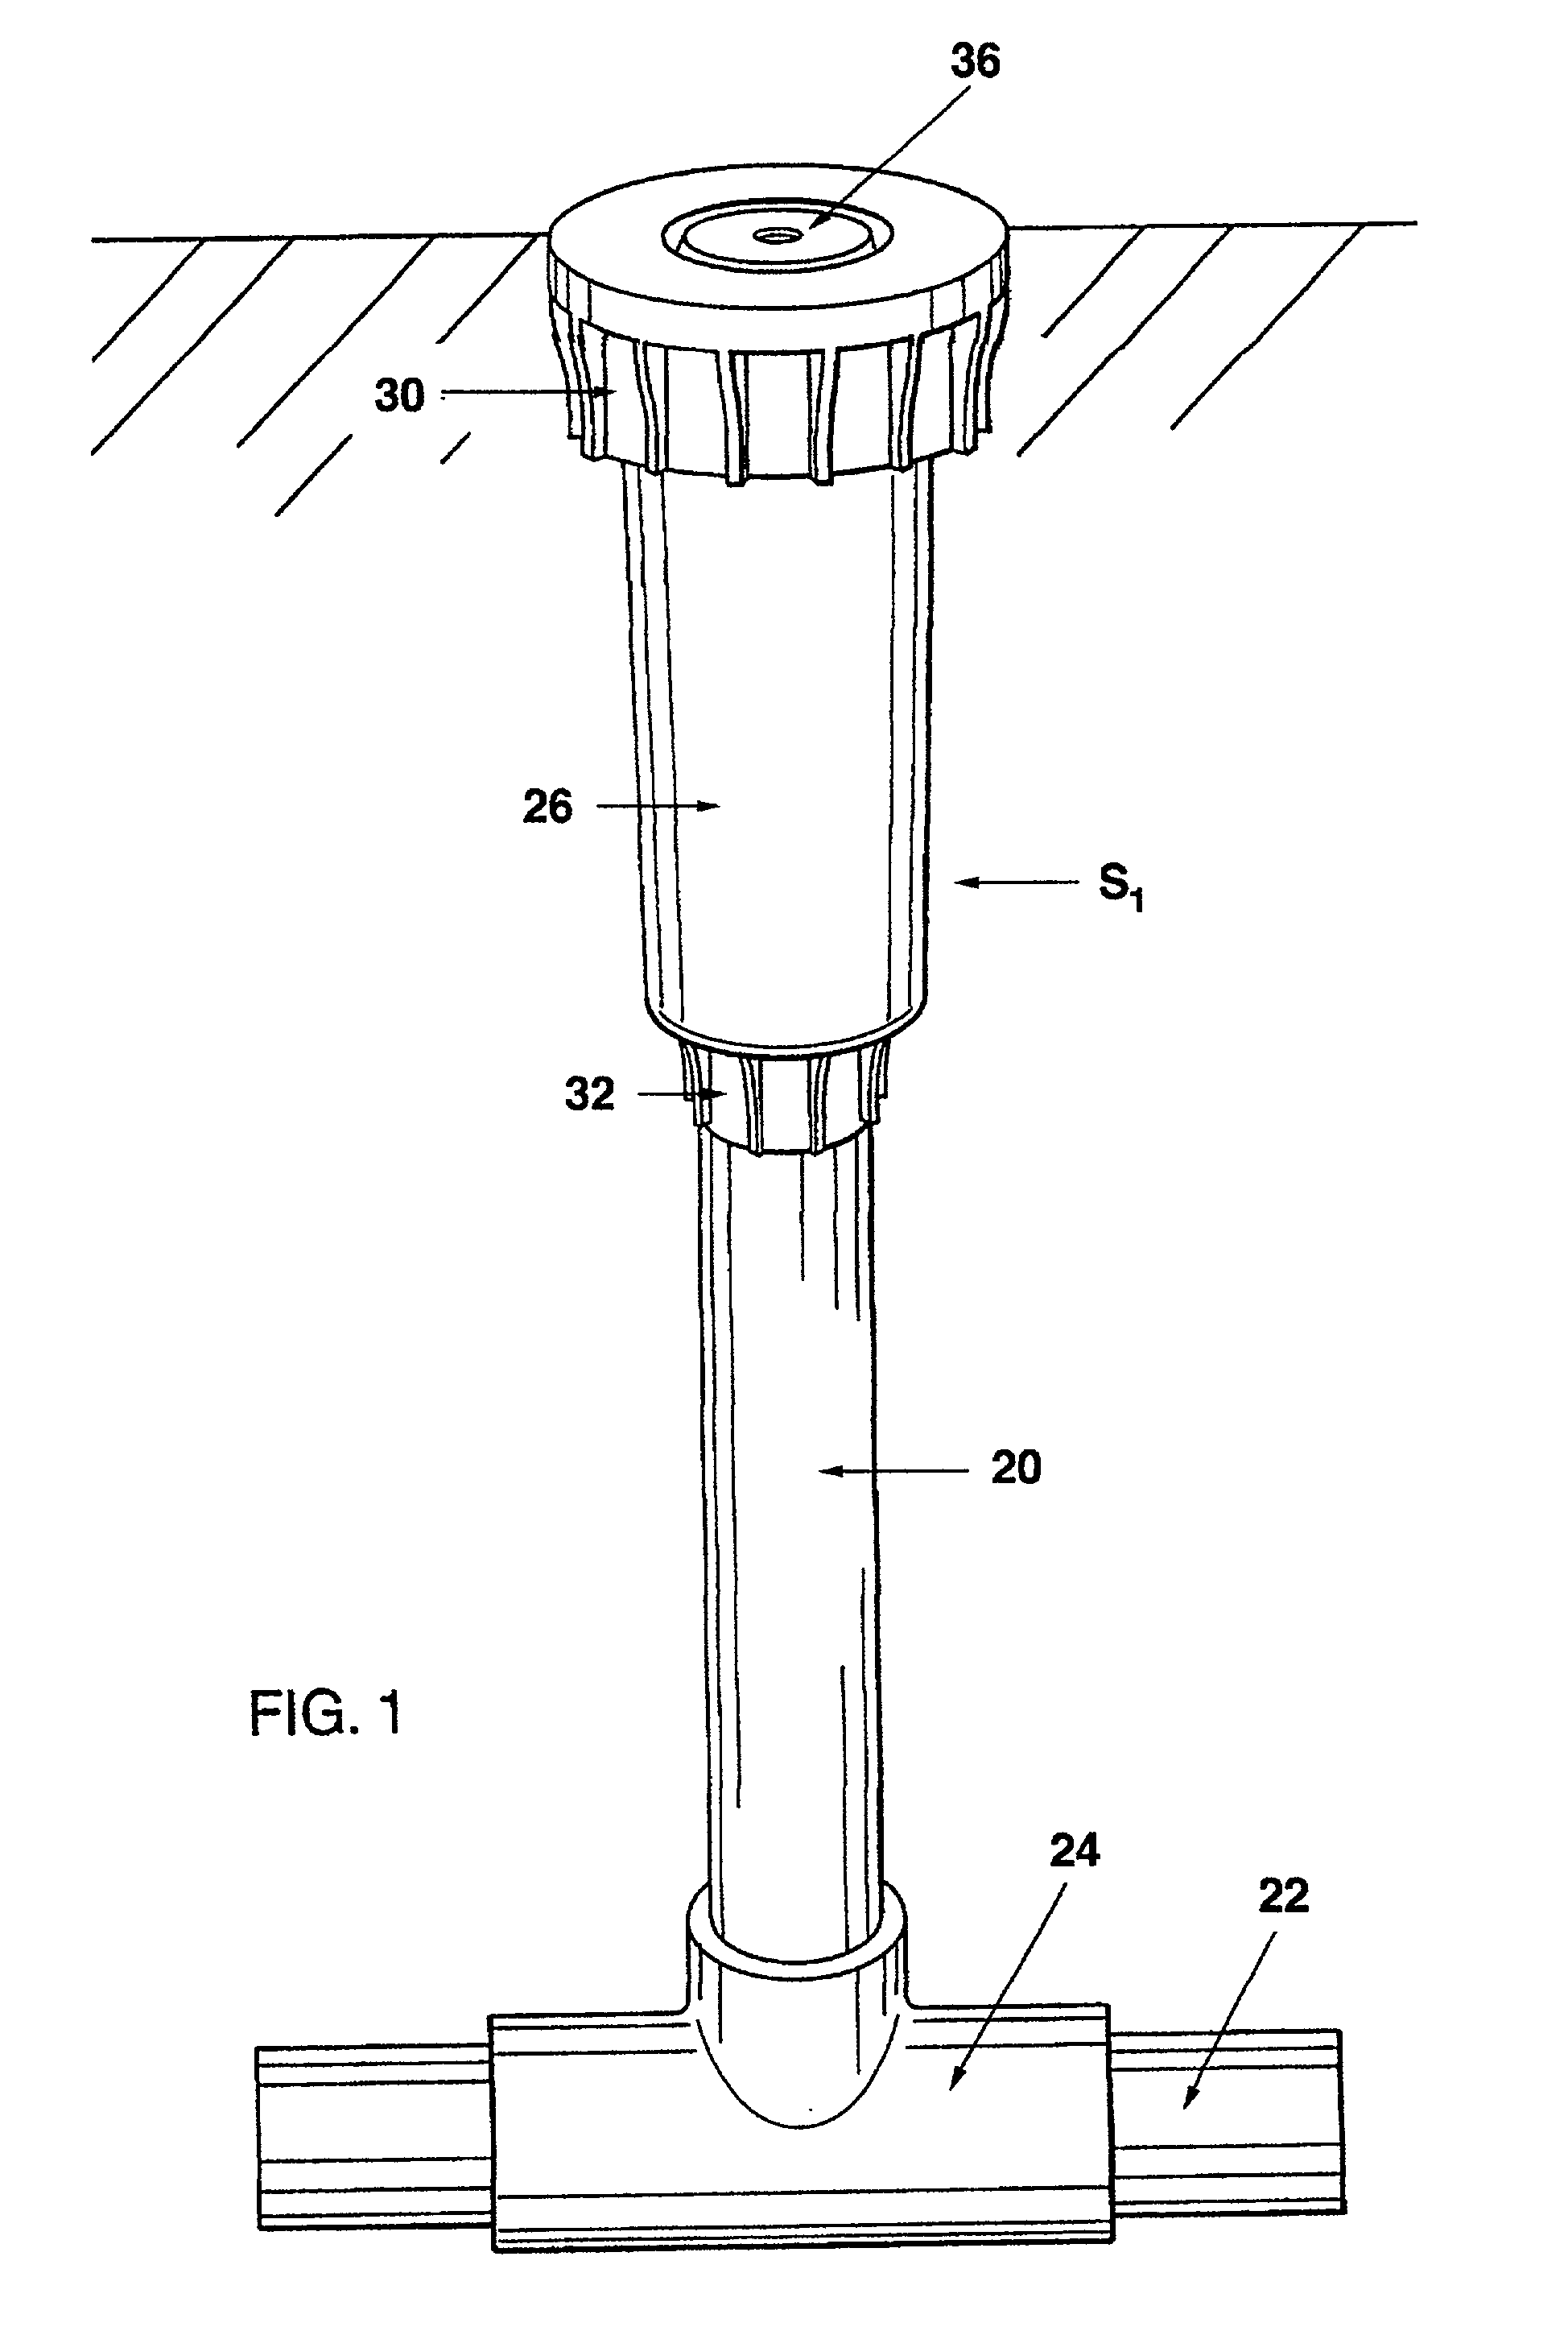 Water sprinkler head with integral off-on water flow control valve and adaptive fittings therefor